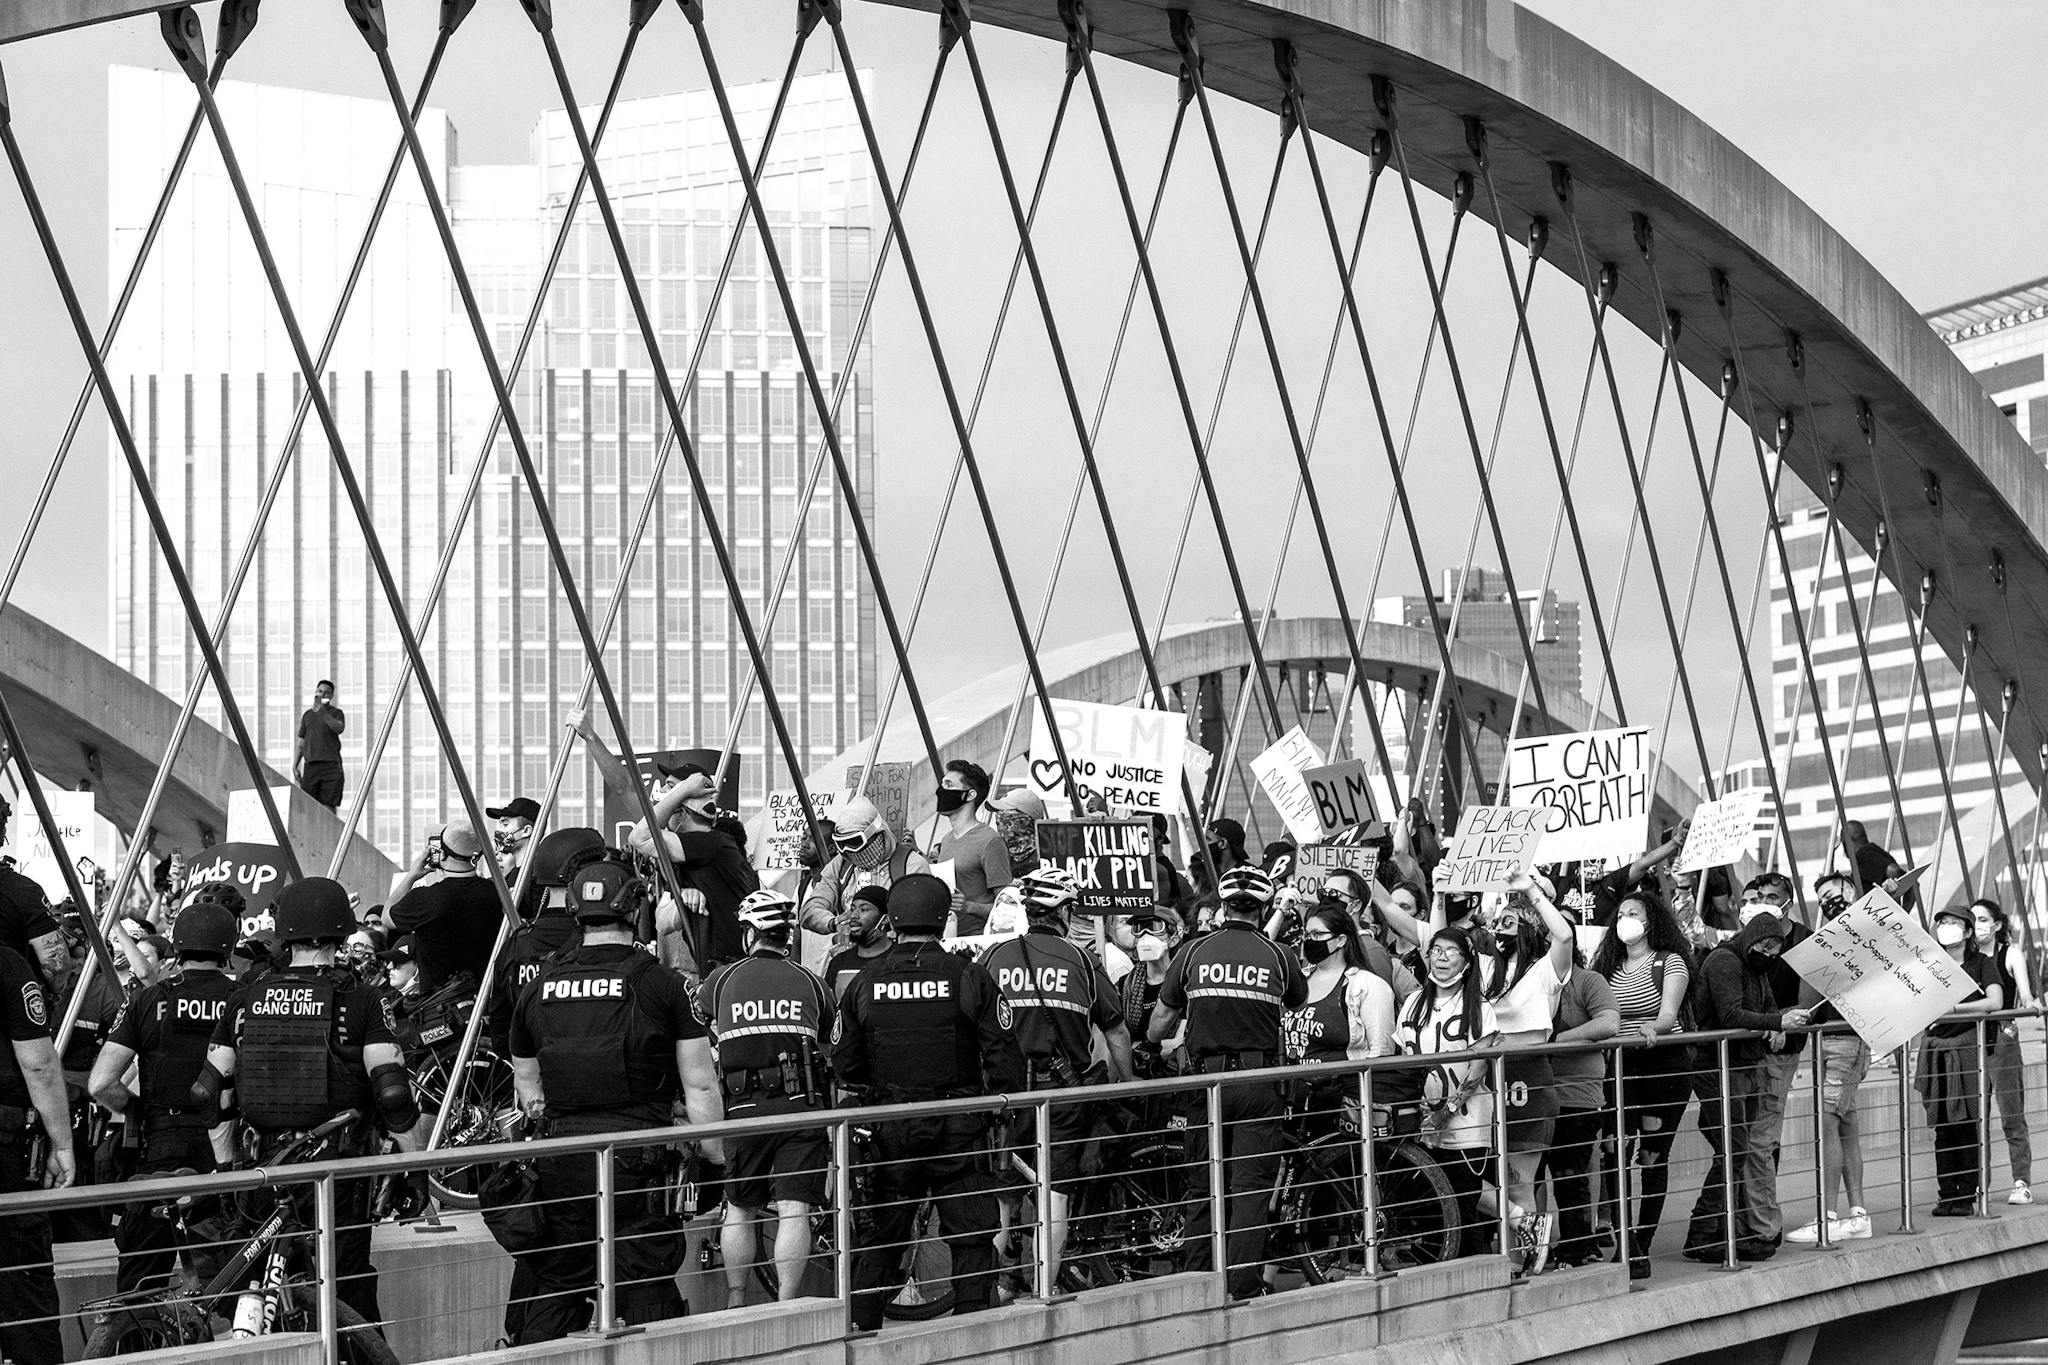 Protesters face the police blockade on the Trinity Bridge in Fort Worth on May 31, 2020.